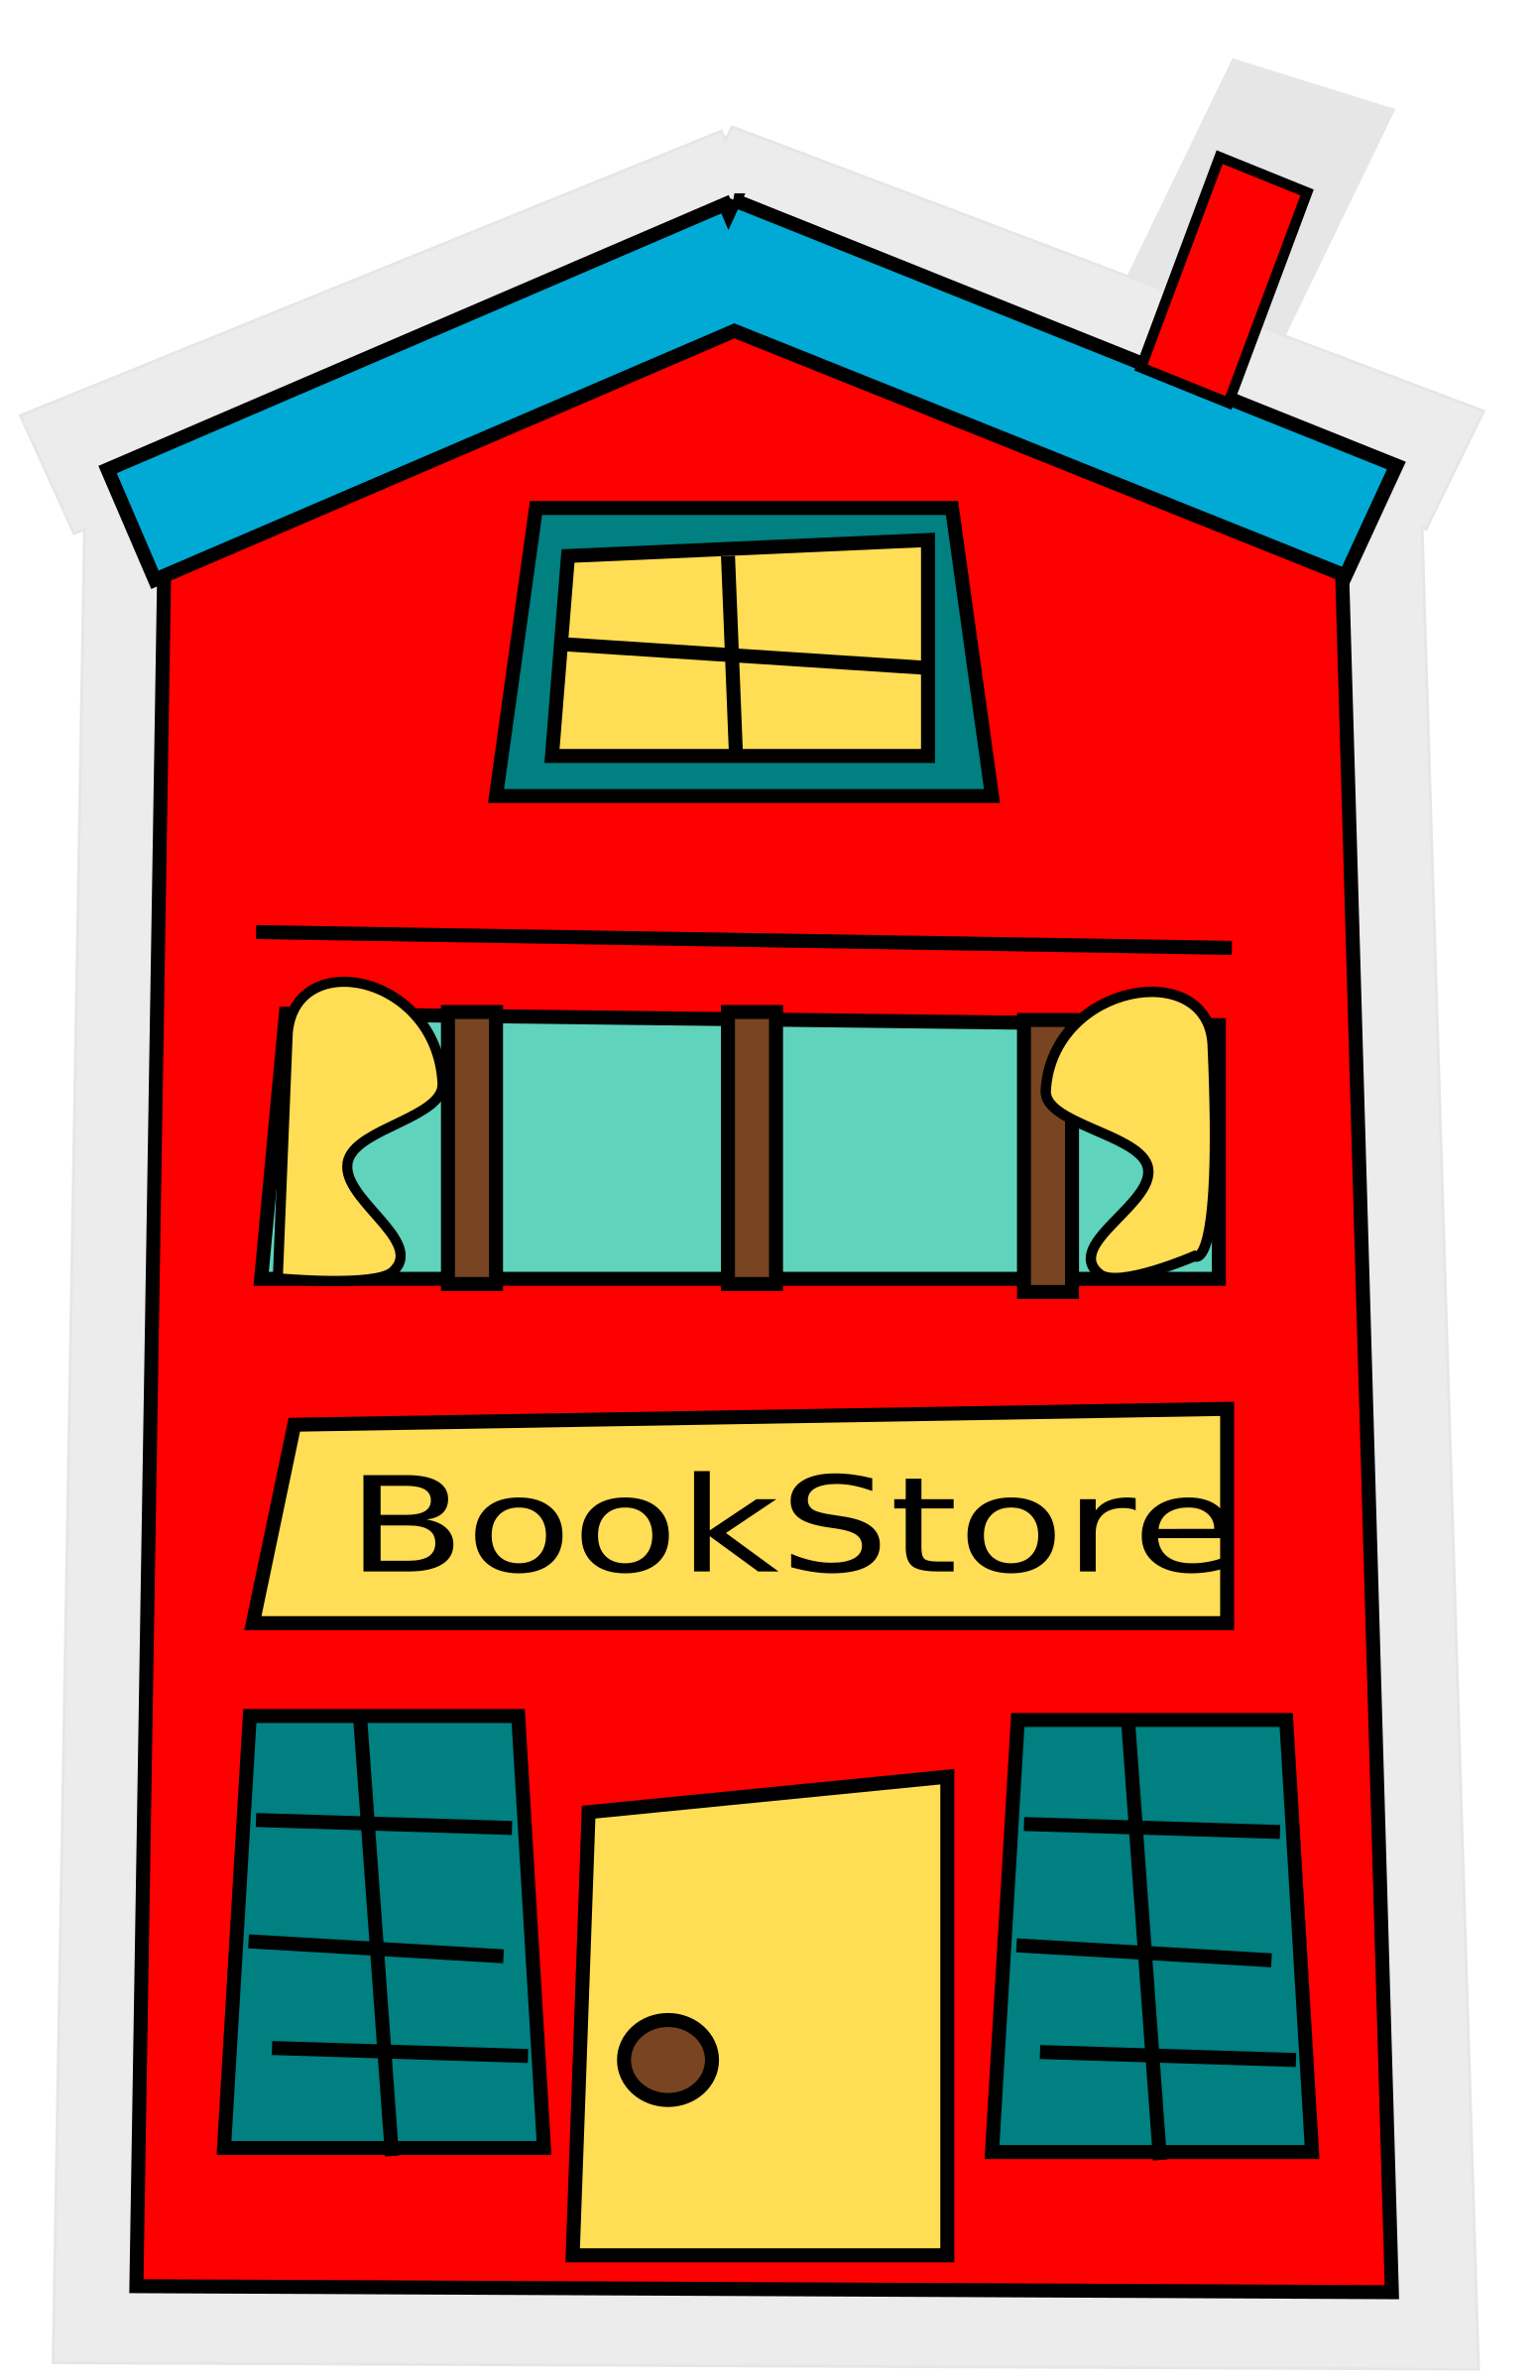 Cartoon bookstore big image. Grocery clipart school library building